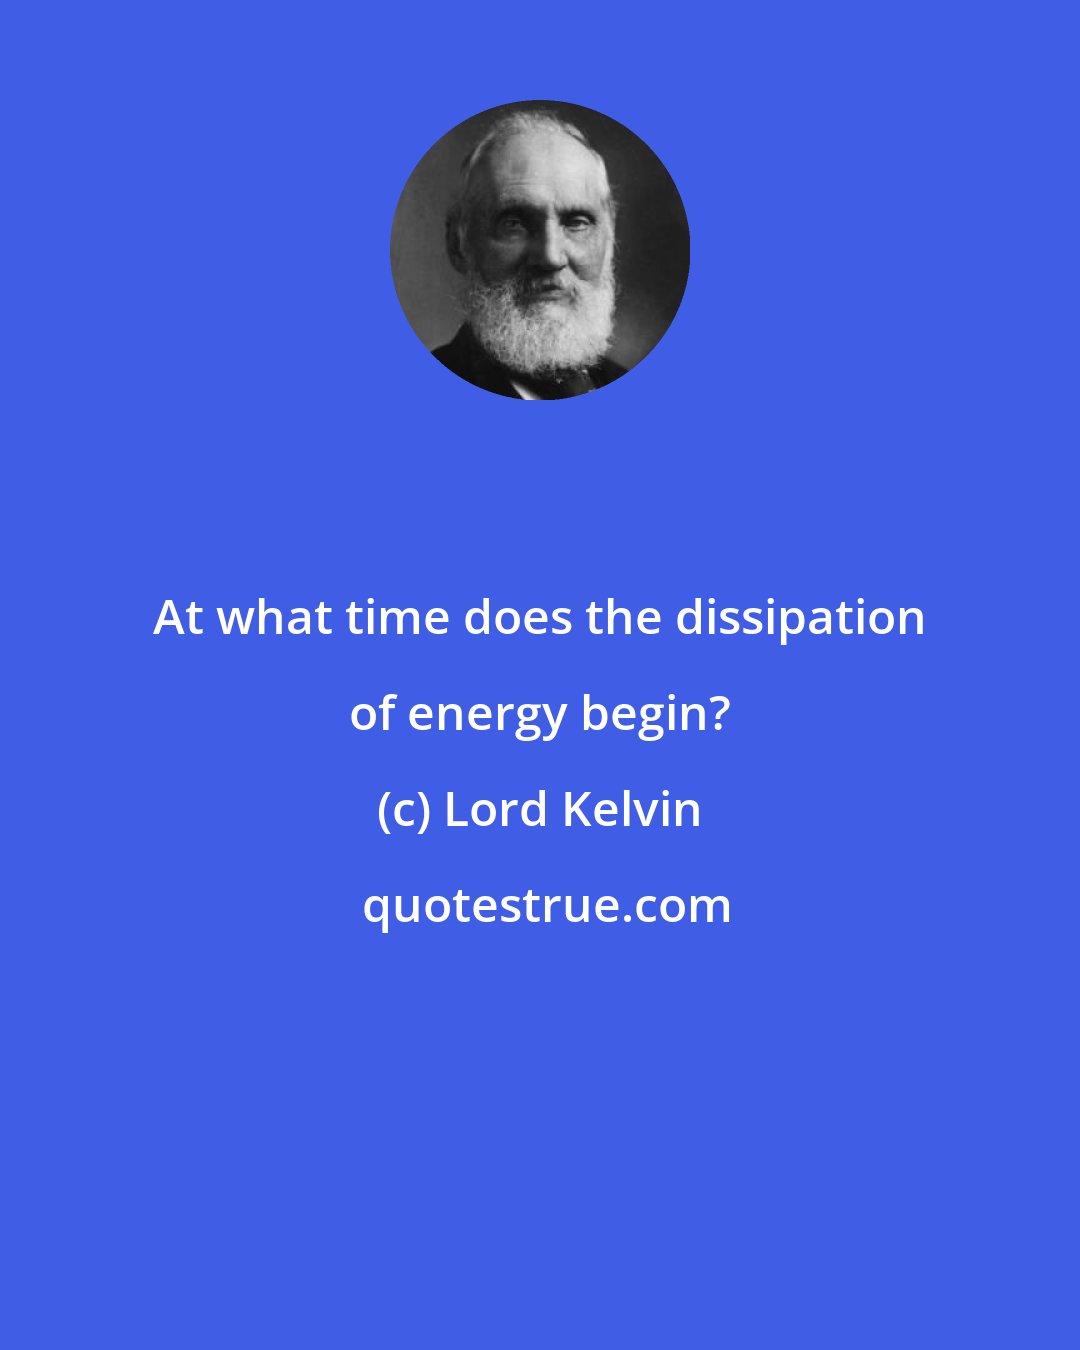 Lord Kelvin: At what time does the dissipation of energy begin?